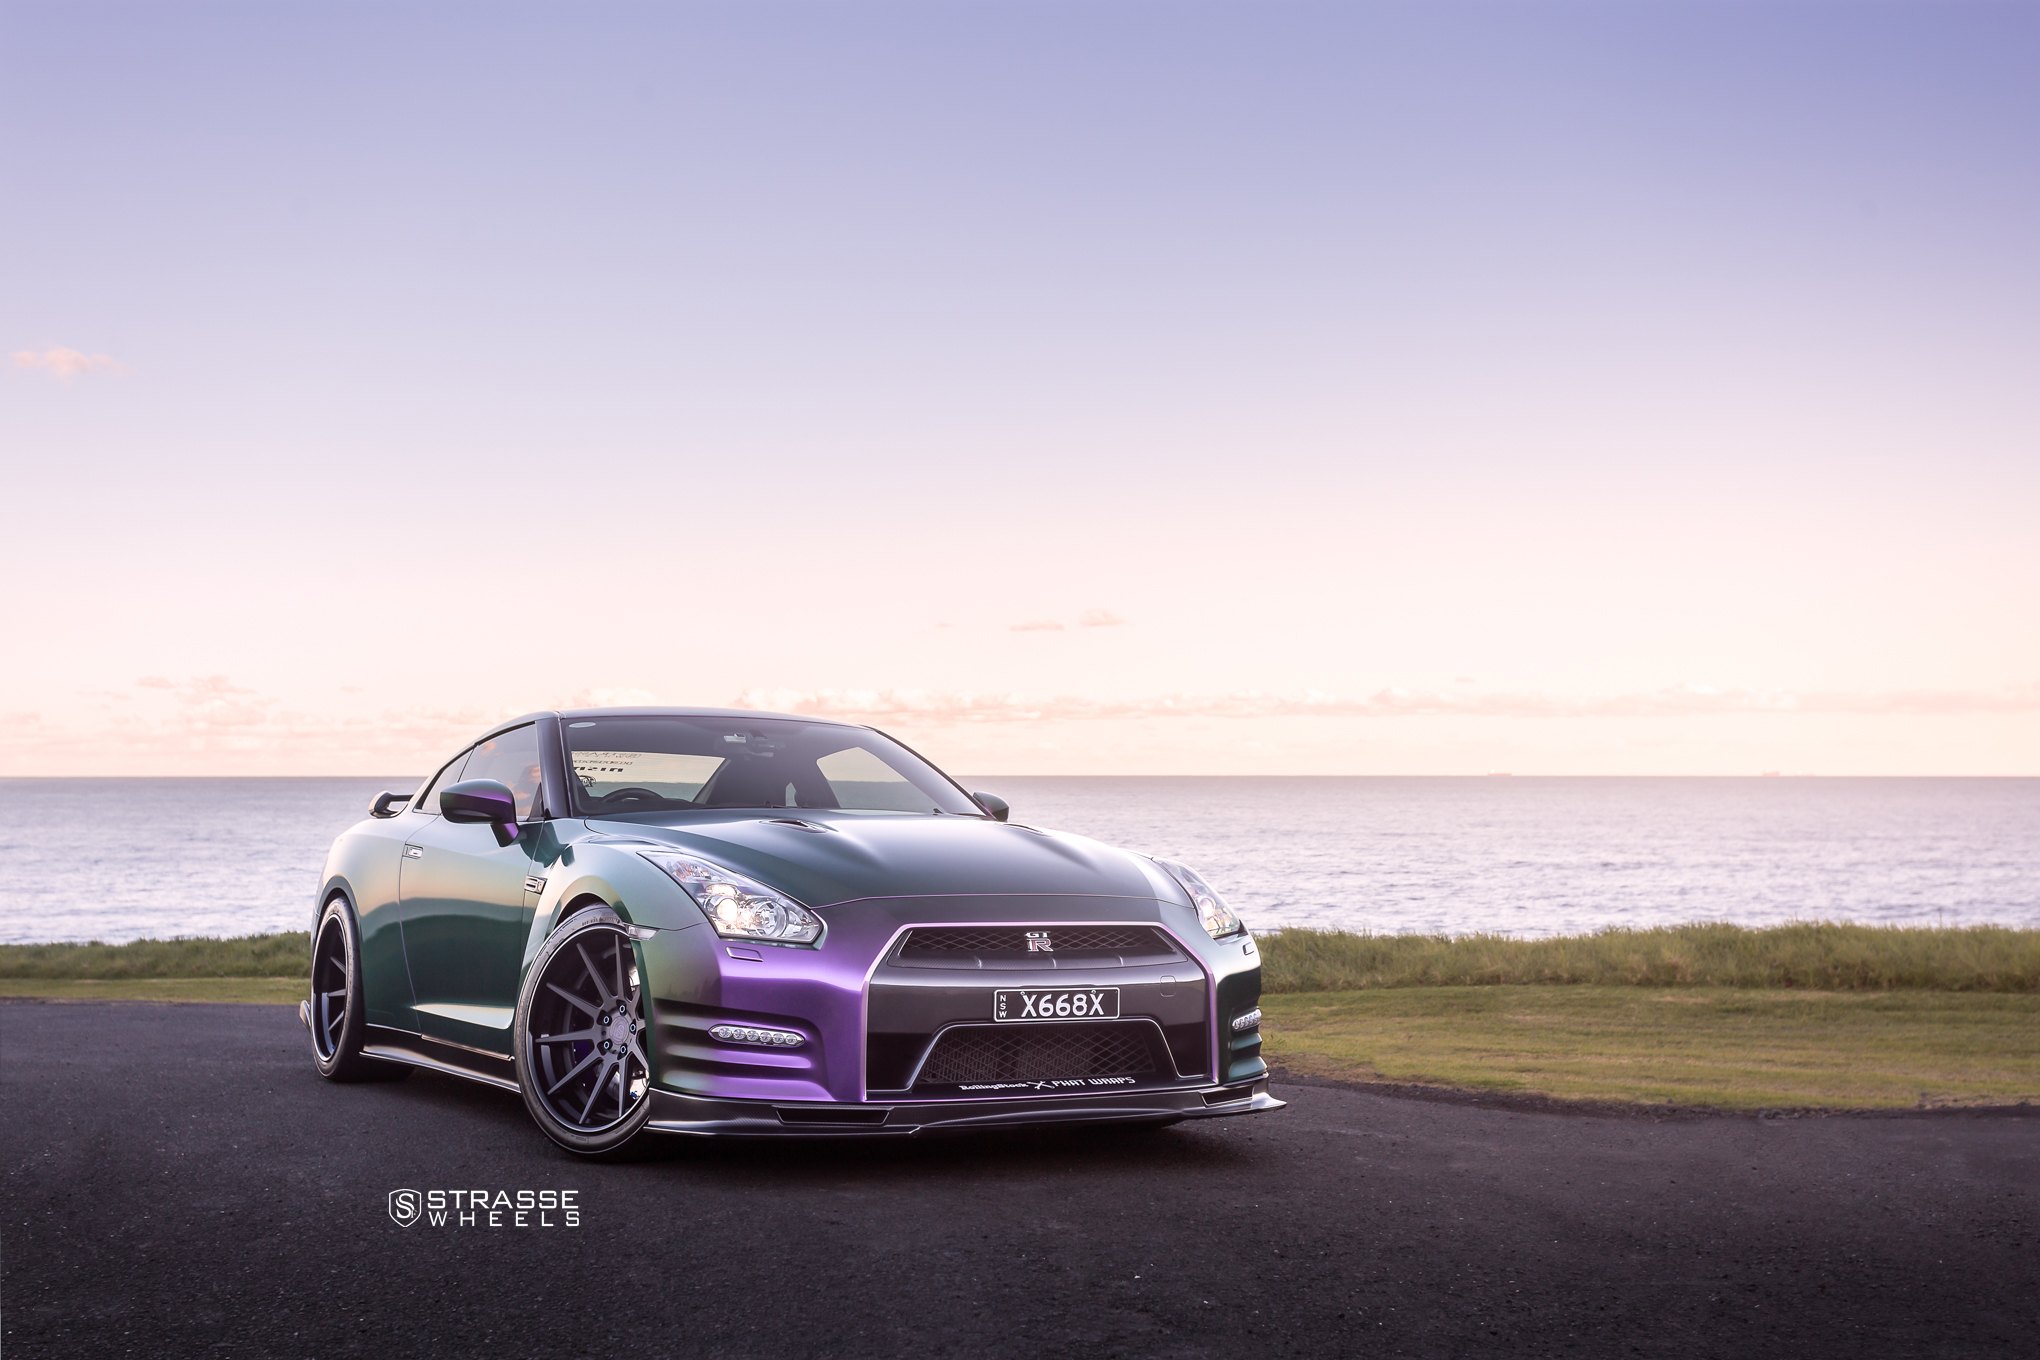 Chameleon Green Nissan GT-R with Custom Front Lip - Photo by Strasse Forged